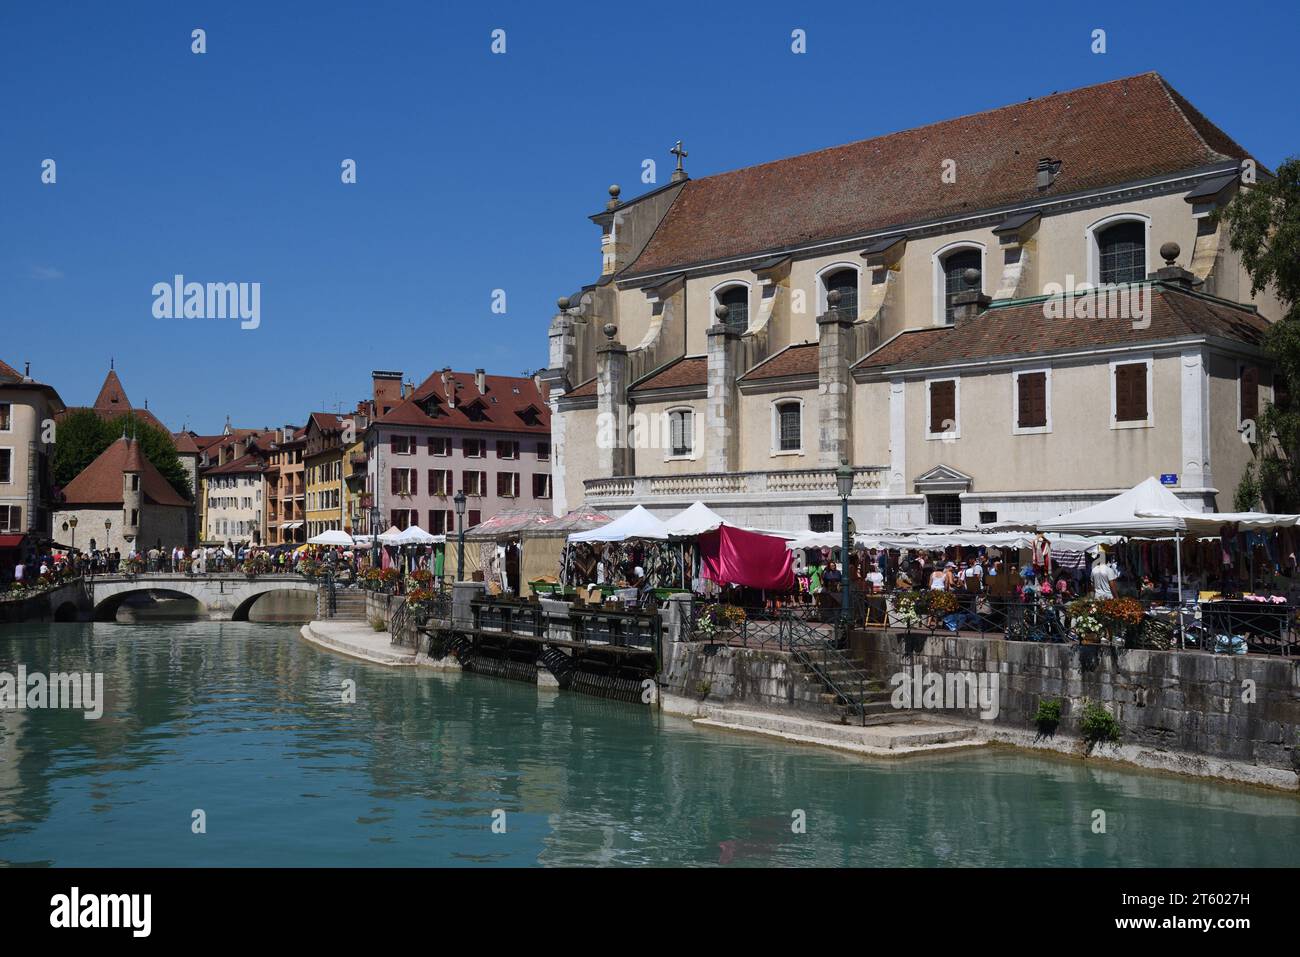 Eglise or Church of Saint Francois de Sales & Outdoor Restaurants on  Thiou River in the Old Town or Historic District of Annecy Haute-Savoie France Stock Photo